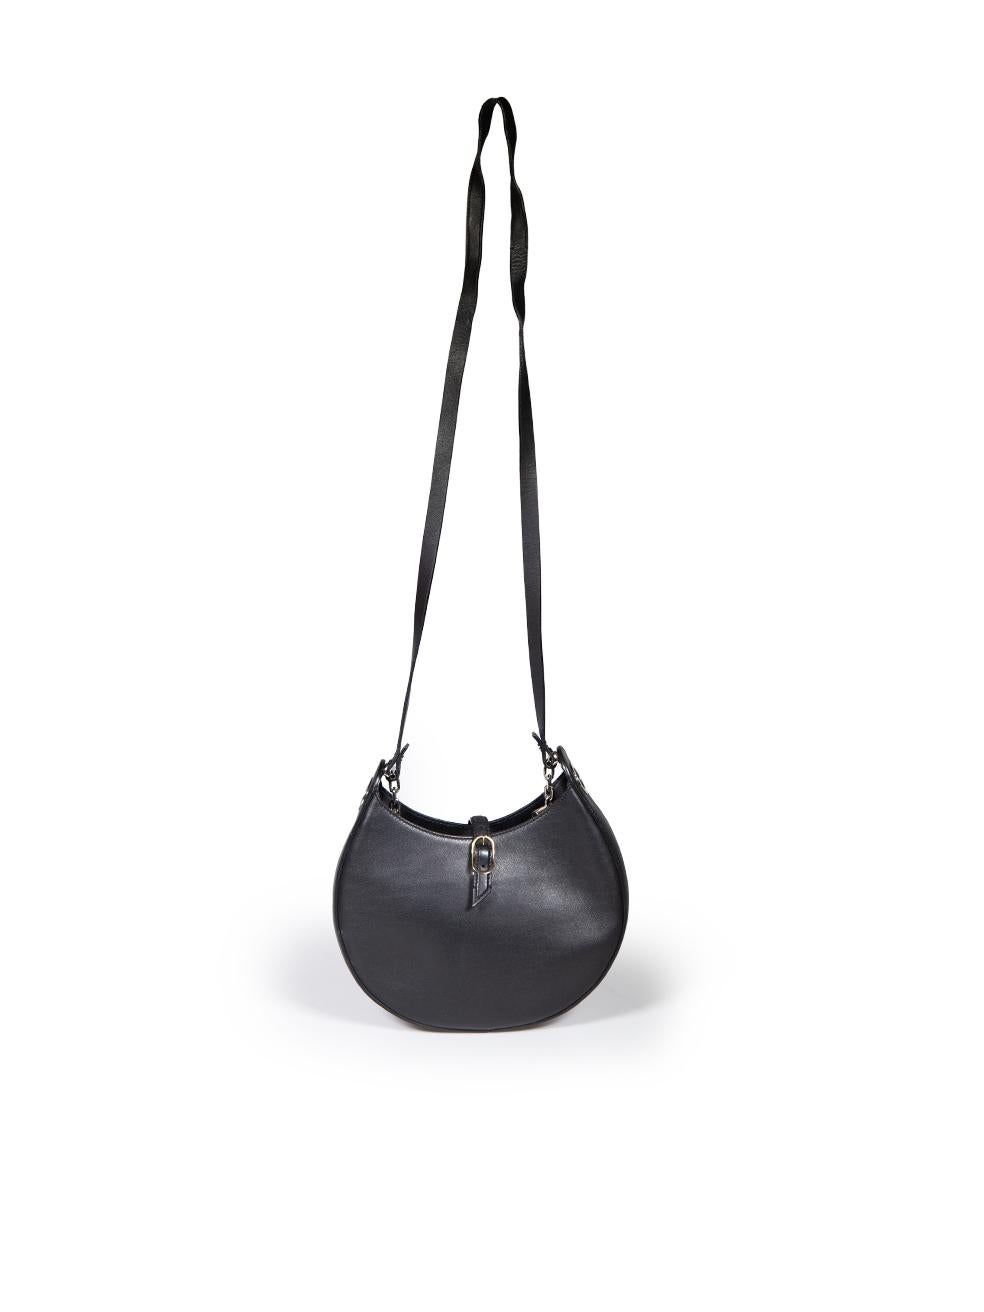 Loewe Black Leather Joyce Small Shoulder Bag In Good Condition For Sale In London, GB